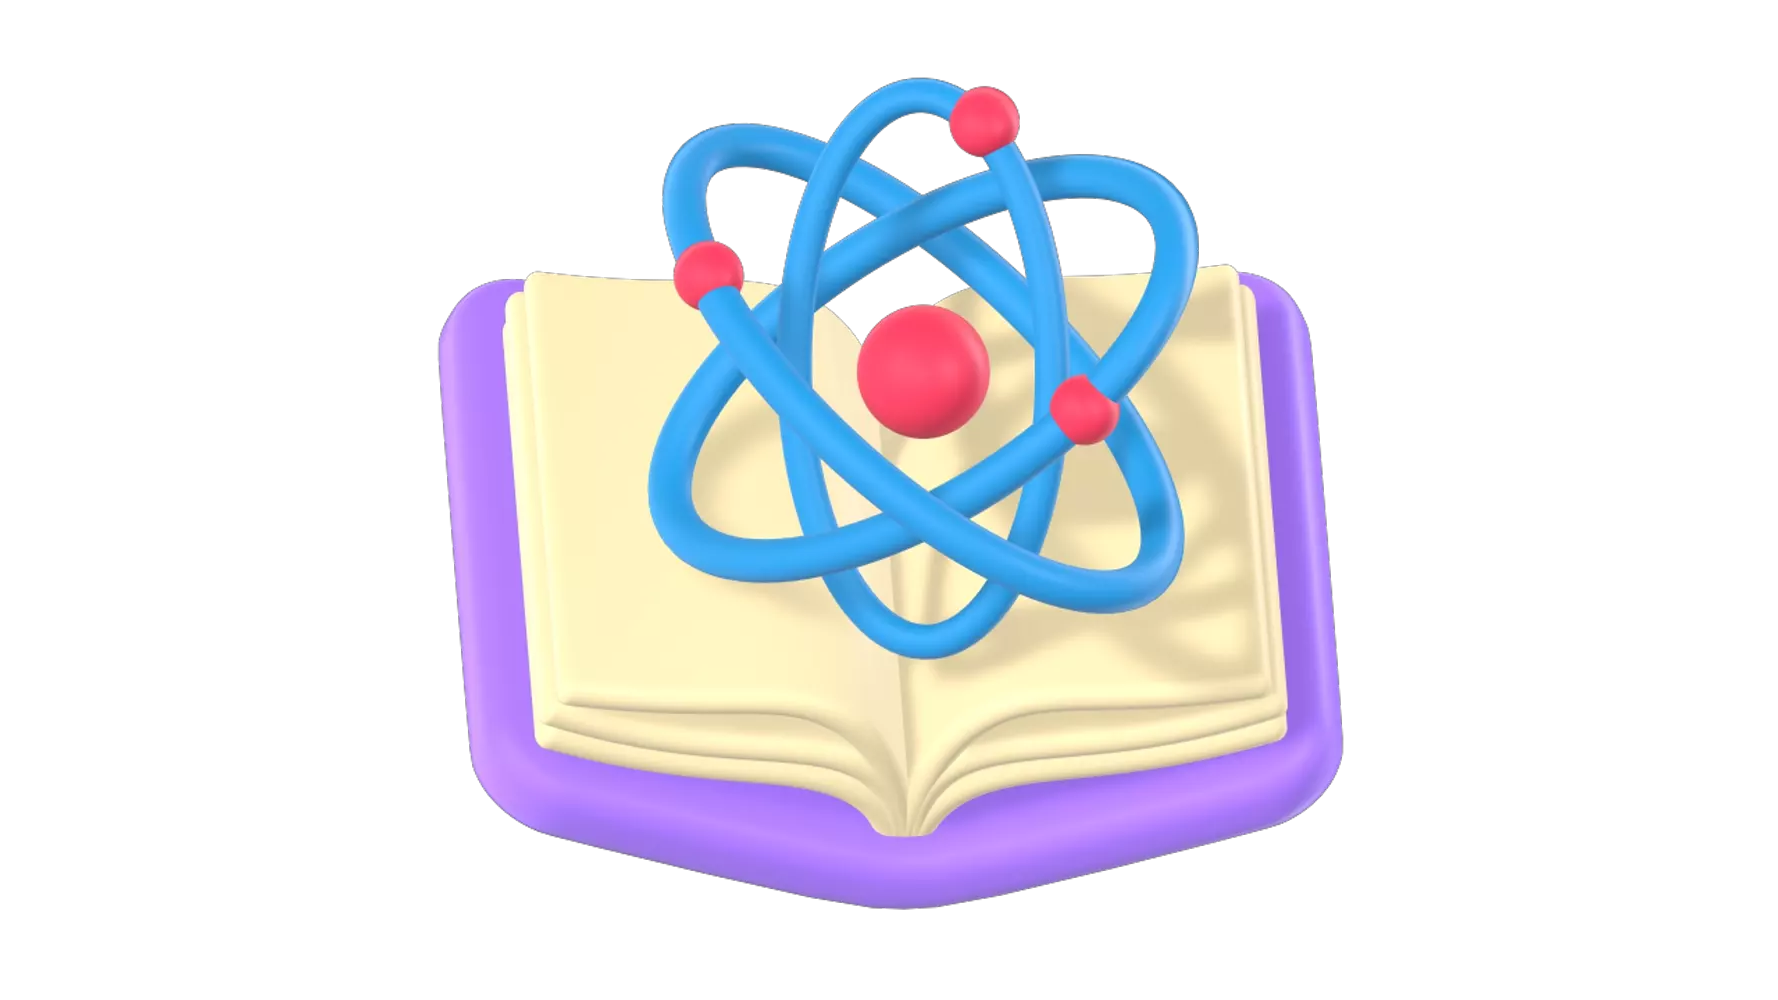 Book Science 3D Graphic